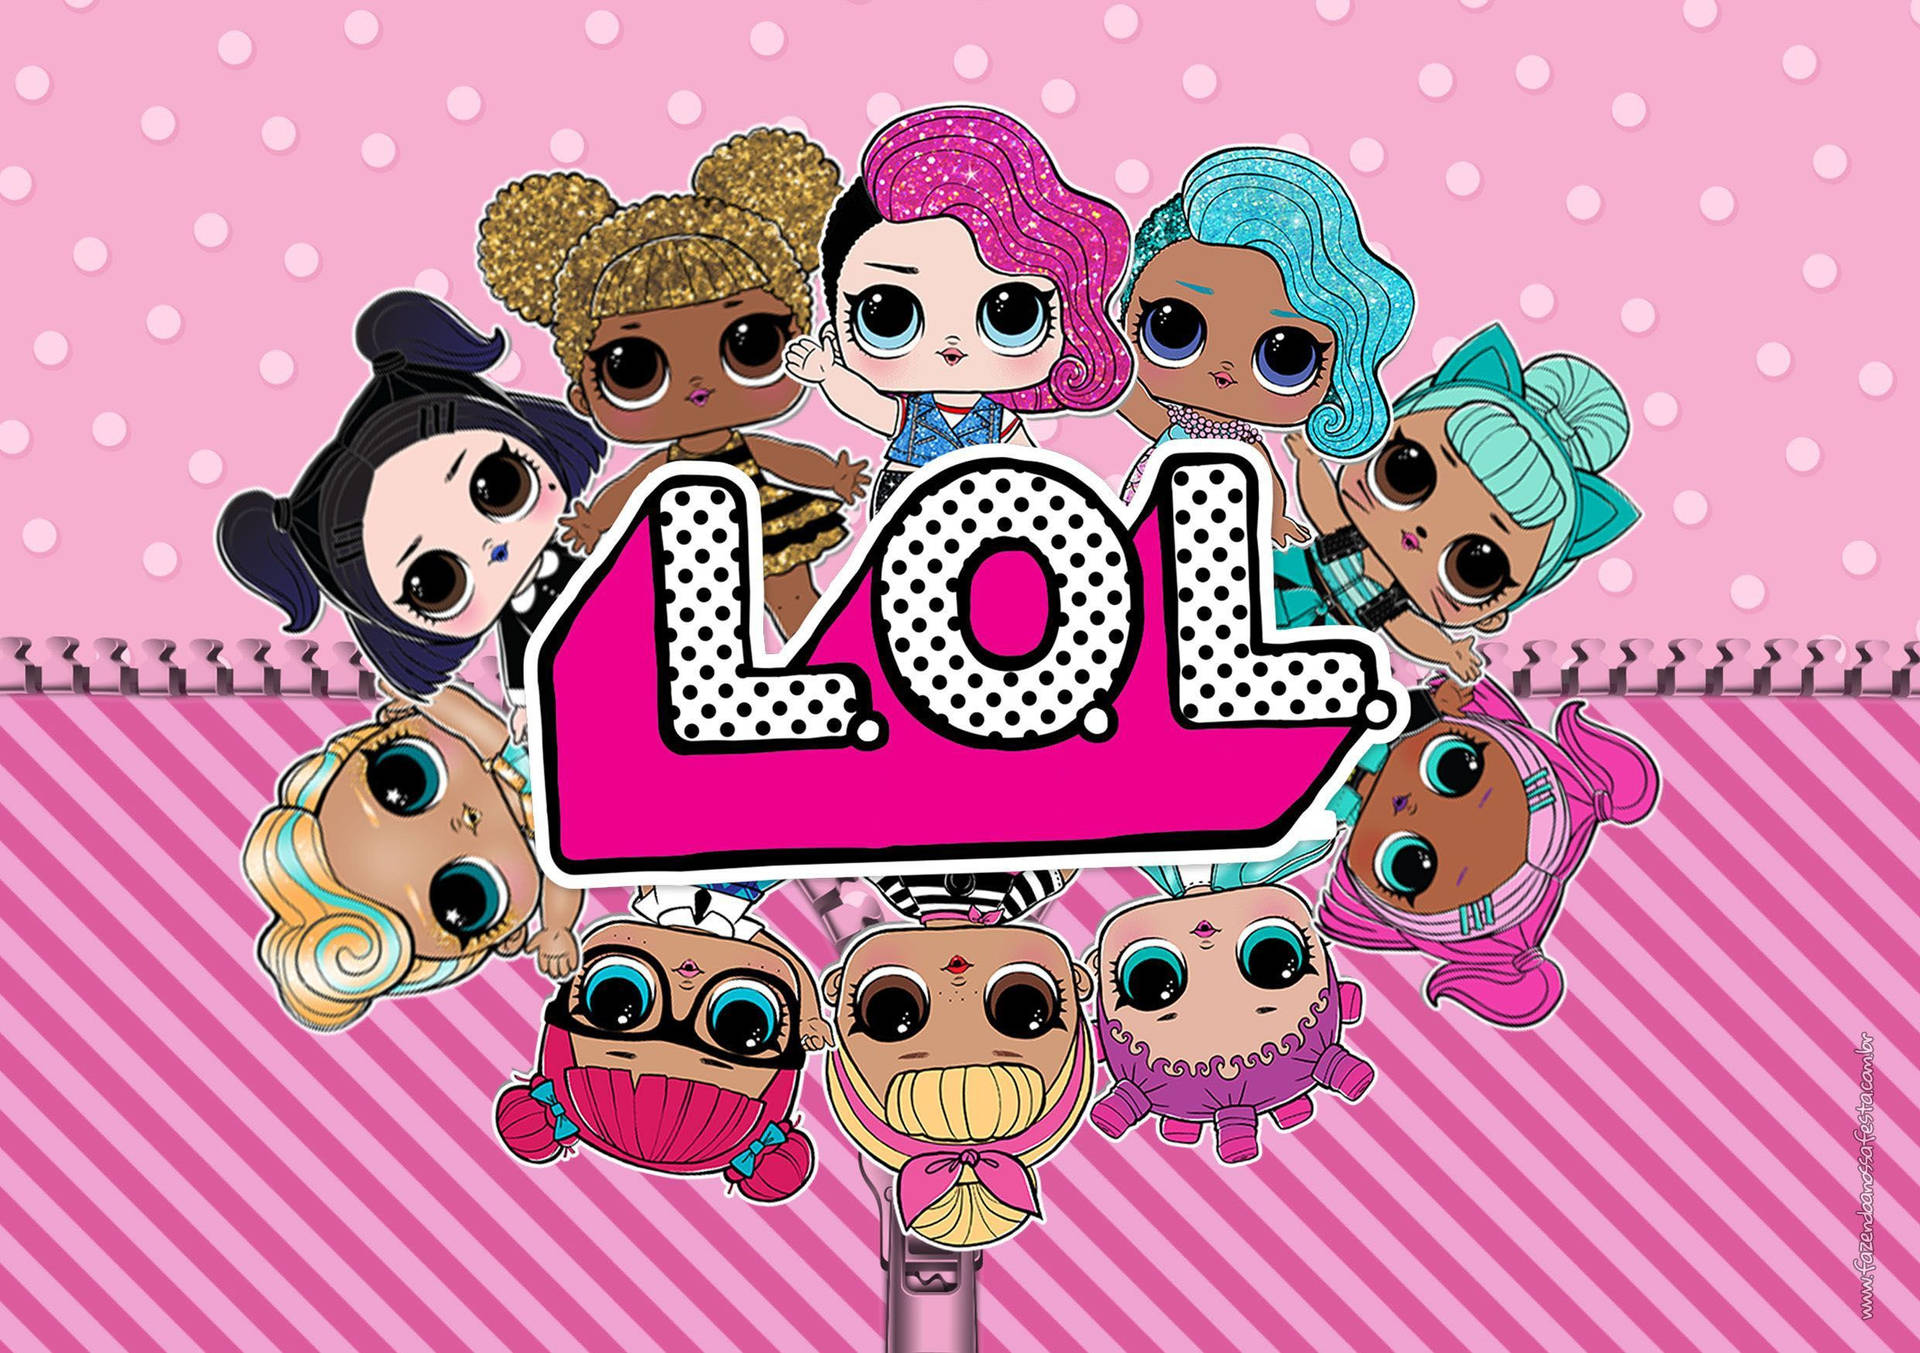 100+] Lol Doll Wallpapers | Wallpapers.Com